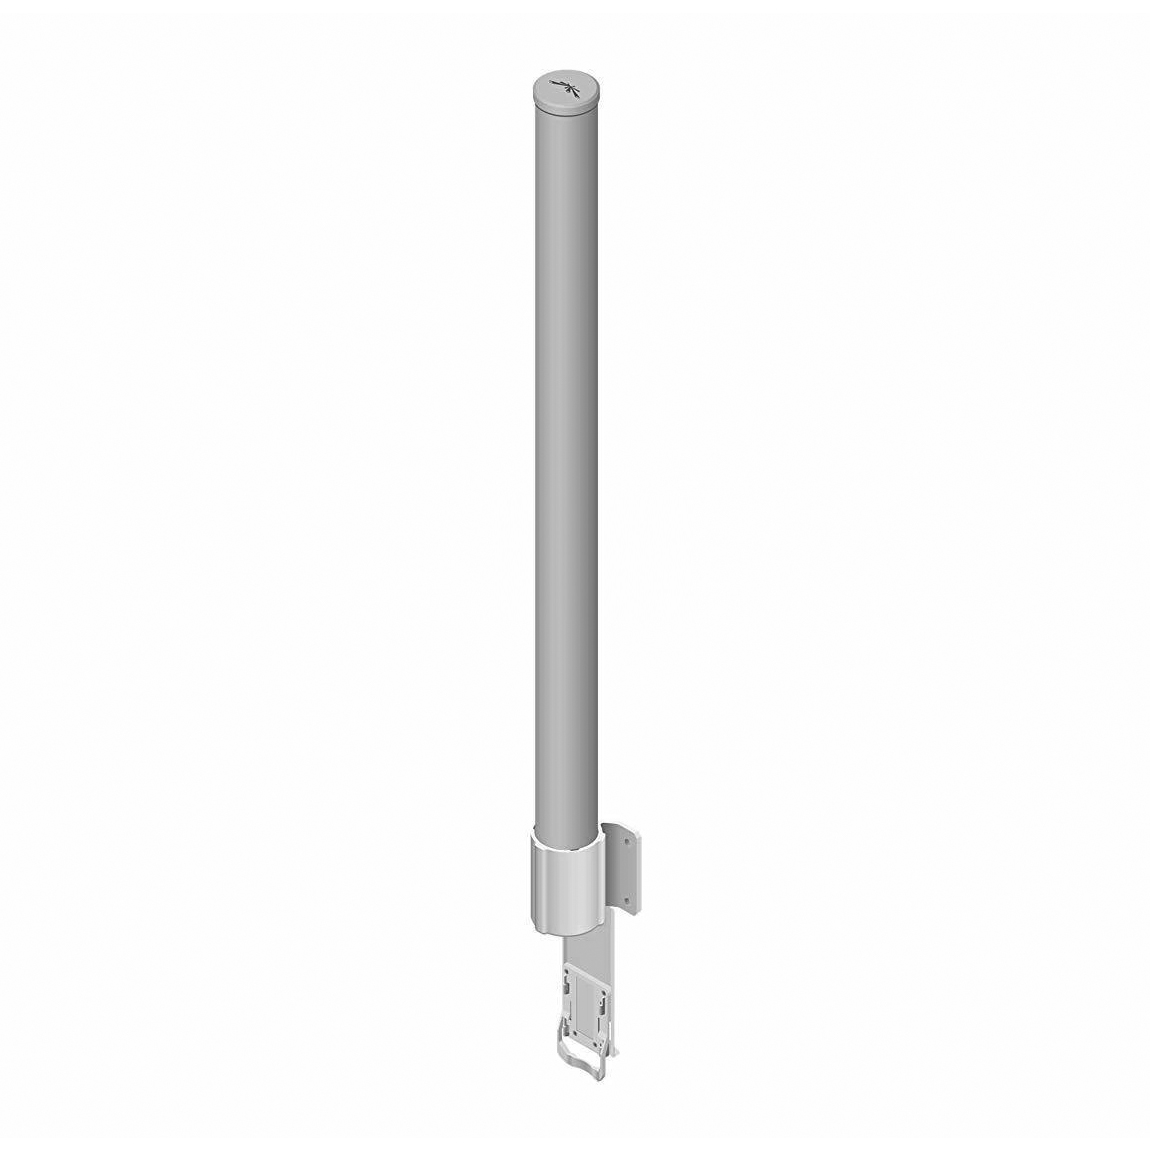 Ubiquiti 2GHz AirMax Dual Omni directional 13dBi Antenna  - All Mounting Accessories & Brackets Included,  Incl 2Yr Warr